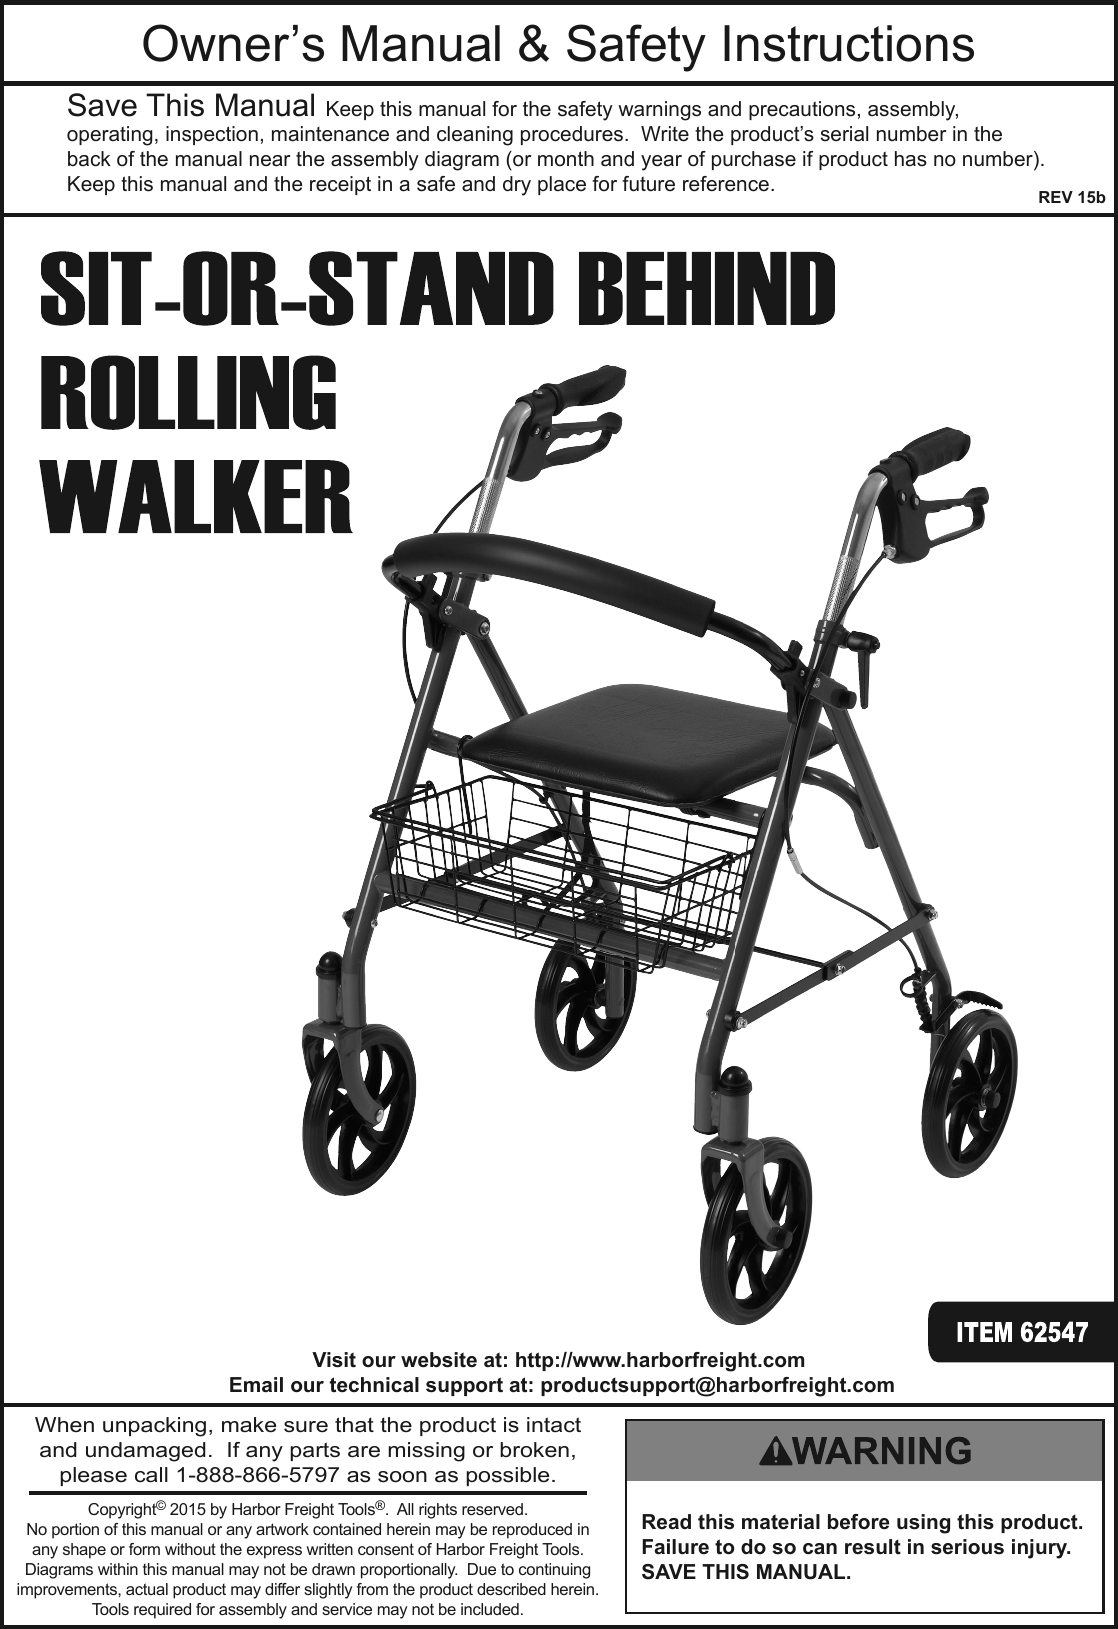 Page 1 of 8 - Manual For The 62547 Sit-or-Stand Behind Rolling Walker